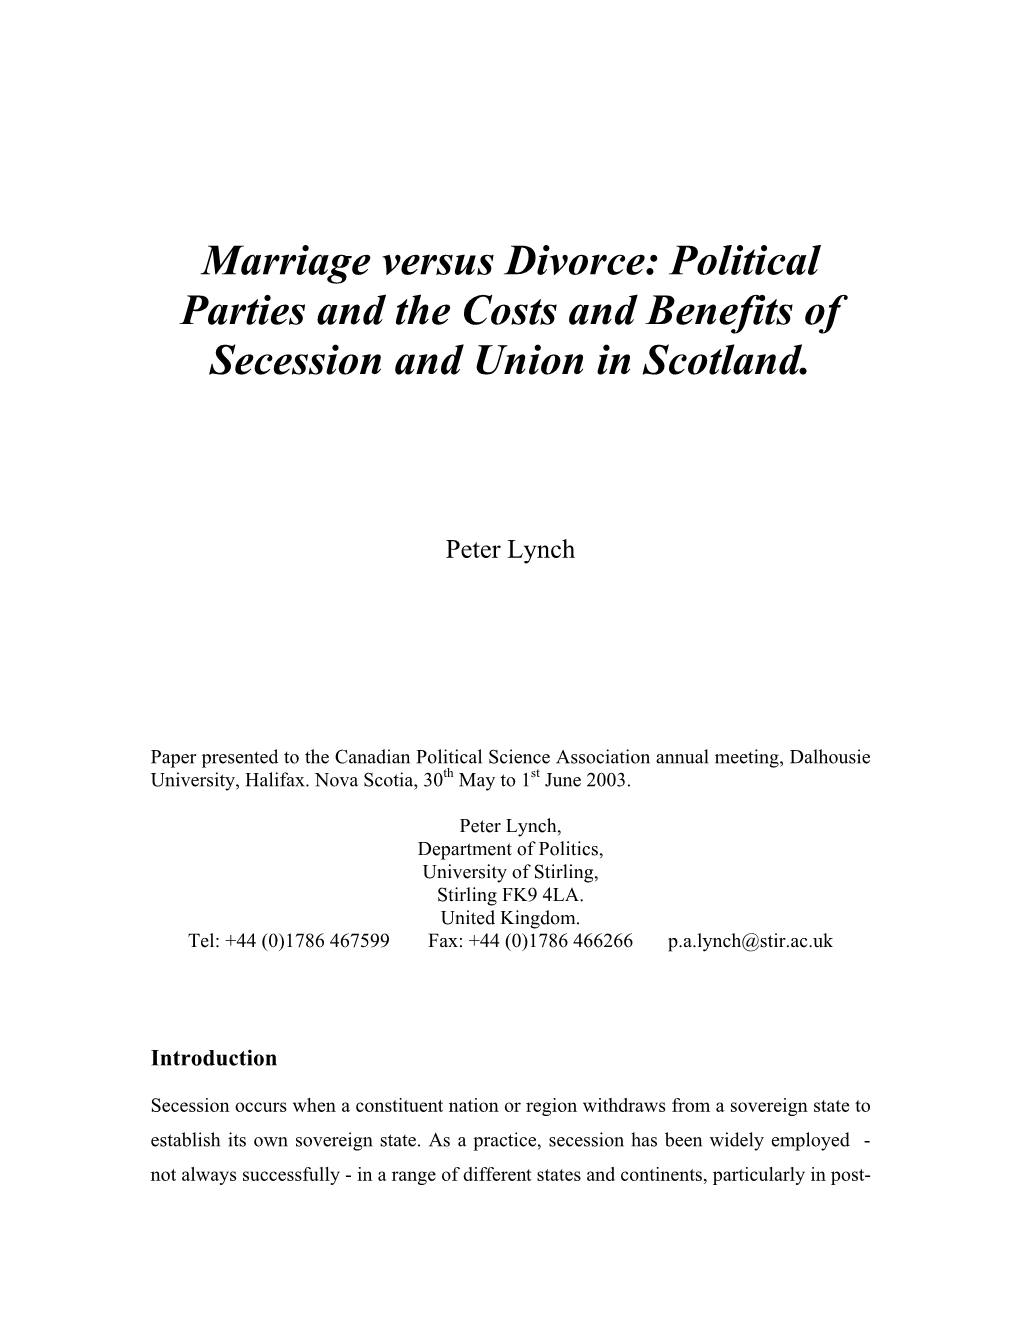 Political Parties and the Costs and Benefits of Secession and Union in Scotland